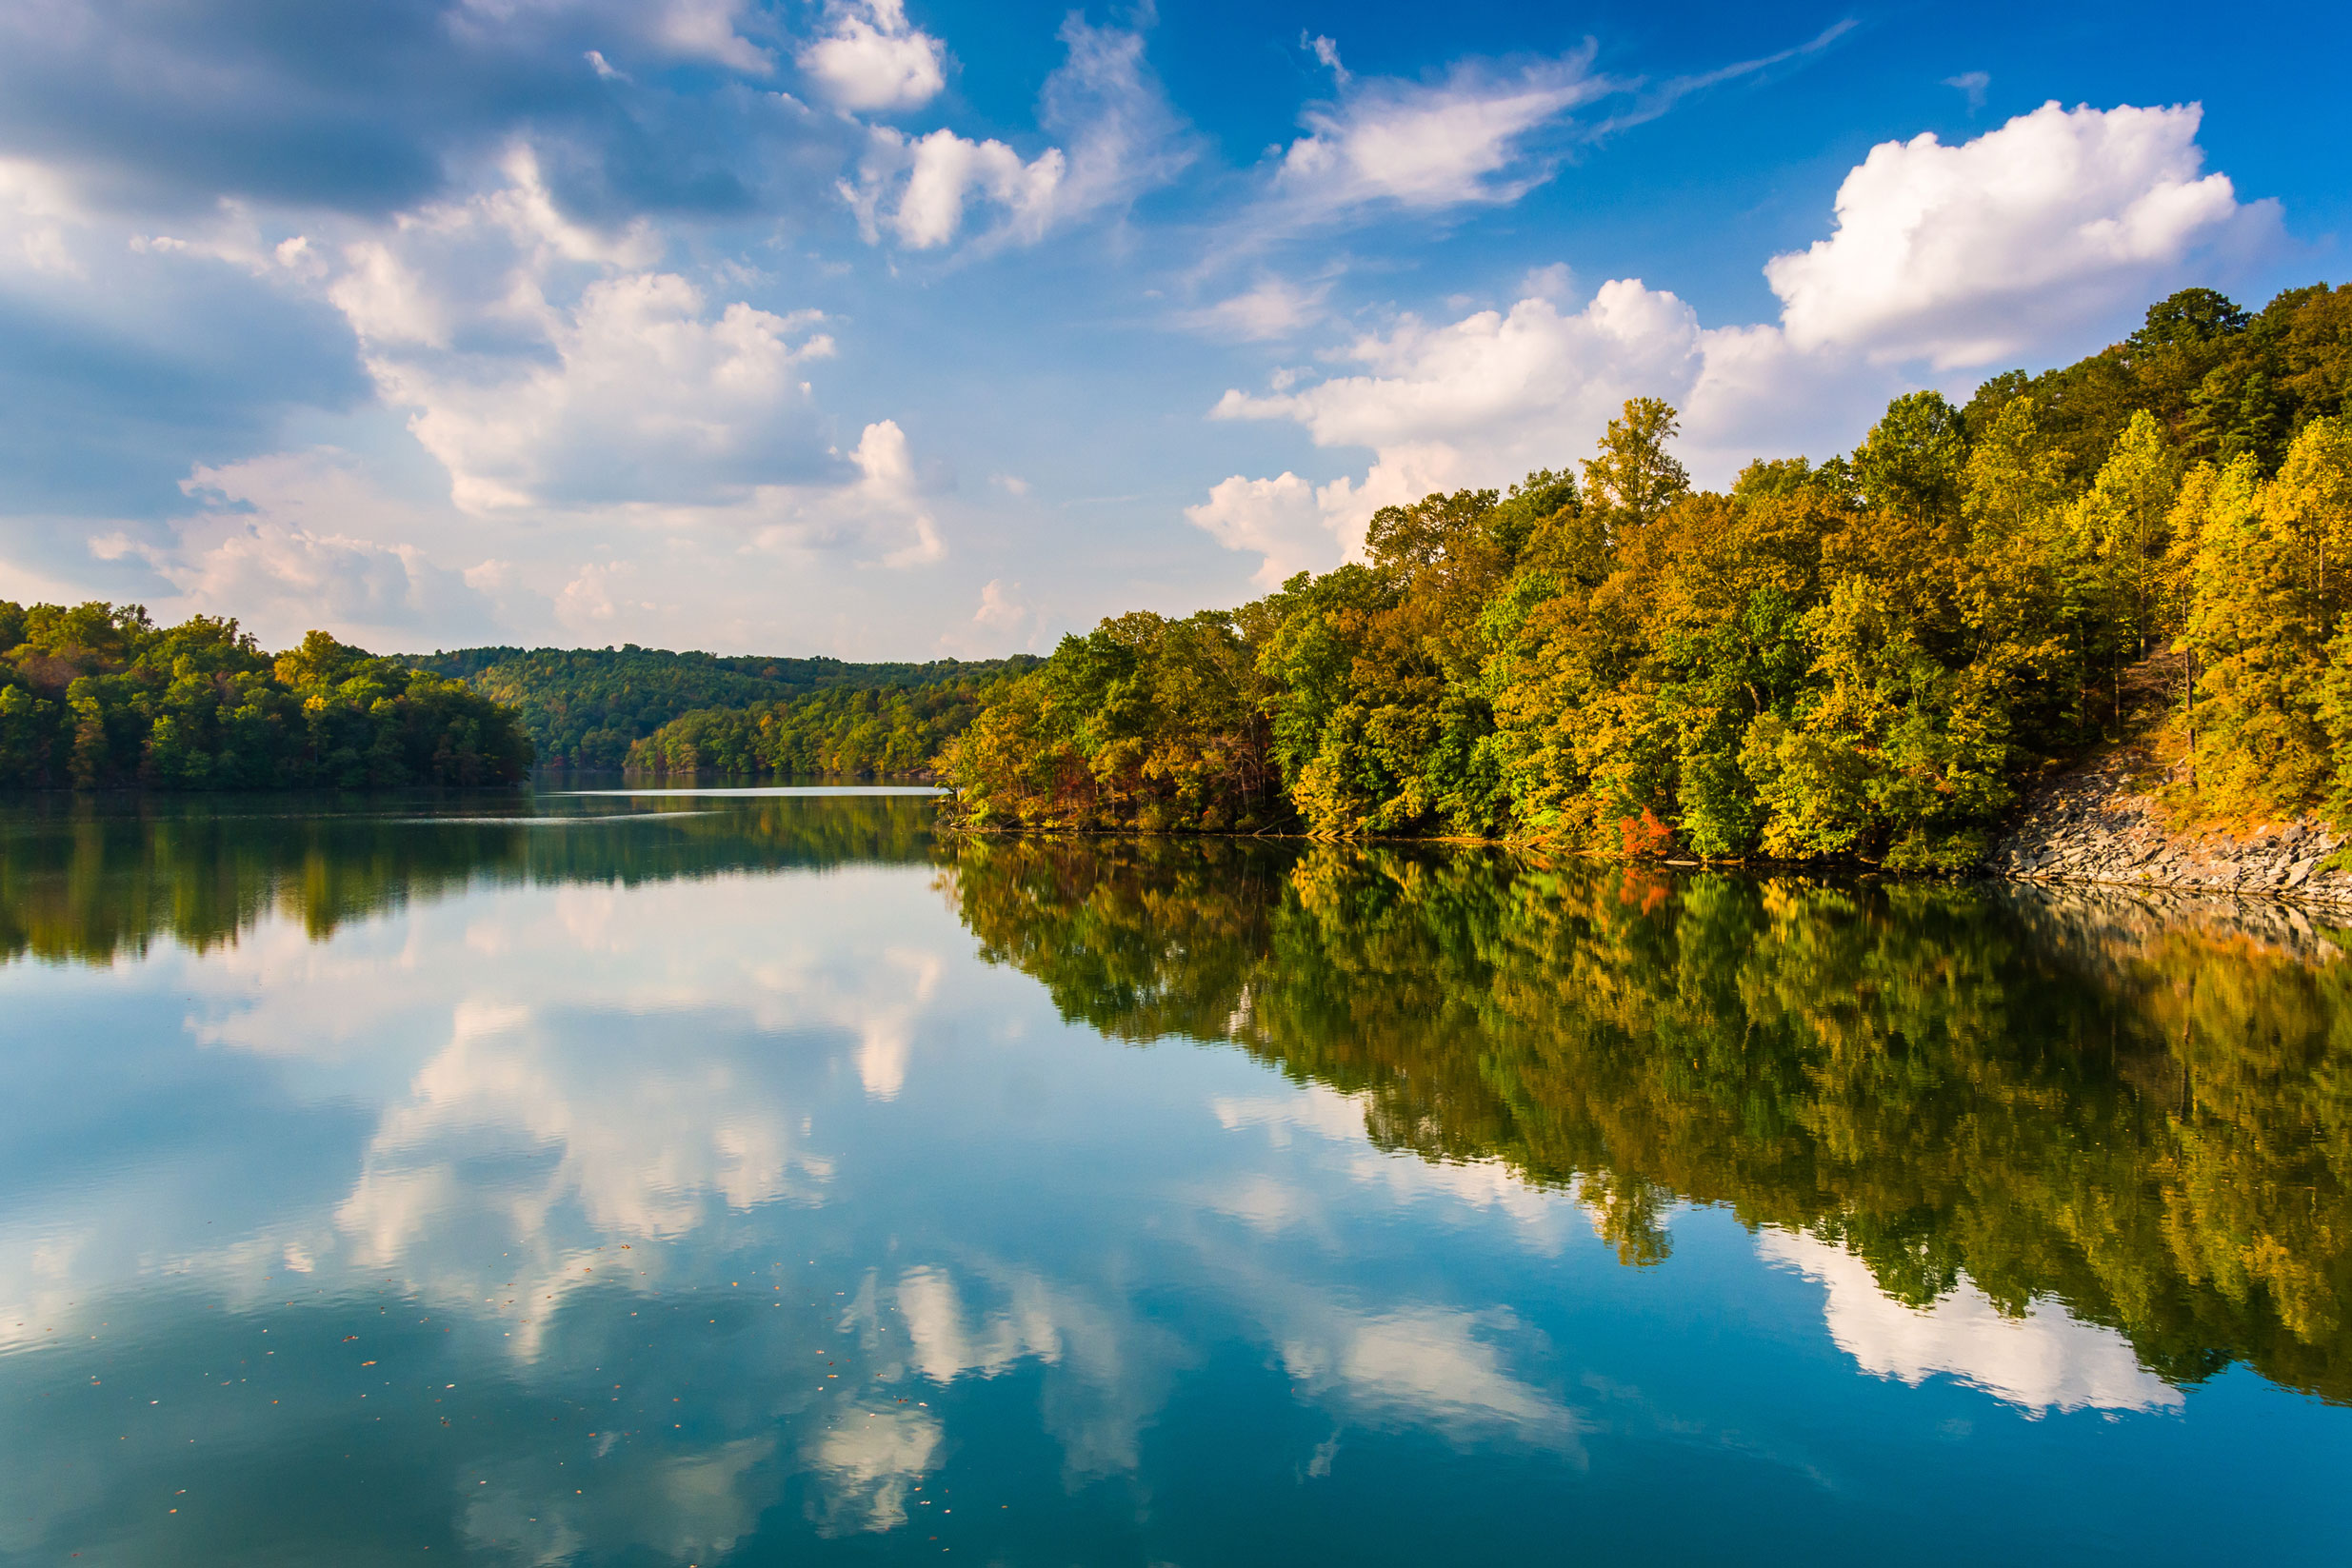 View of the Potomac River with trees and clouds in the crystal clear reflection